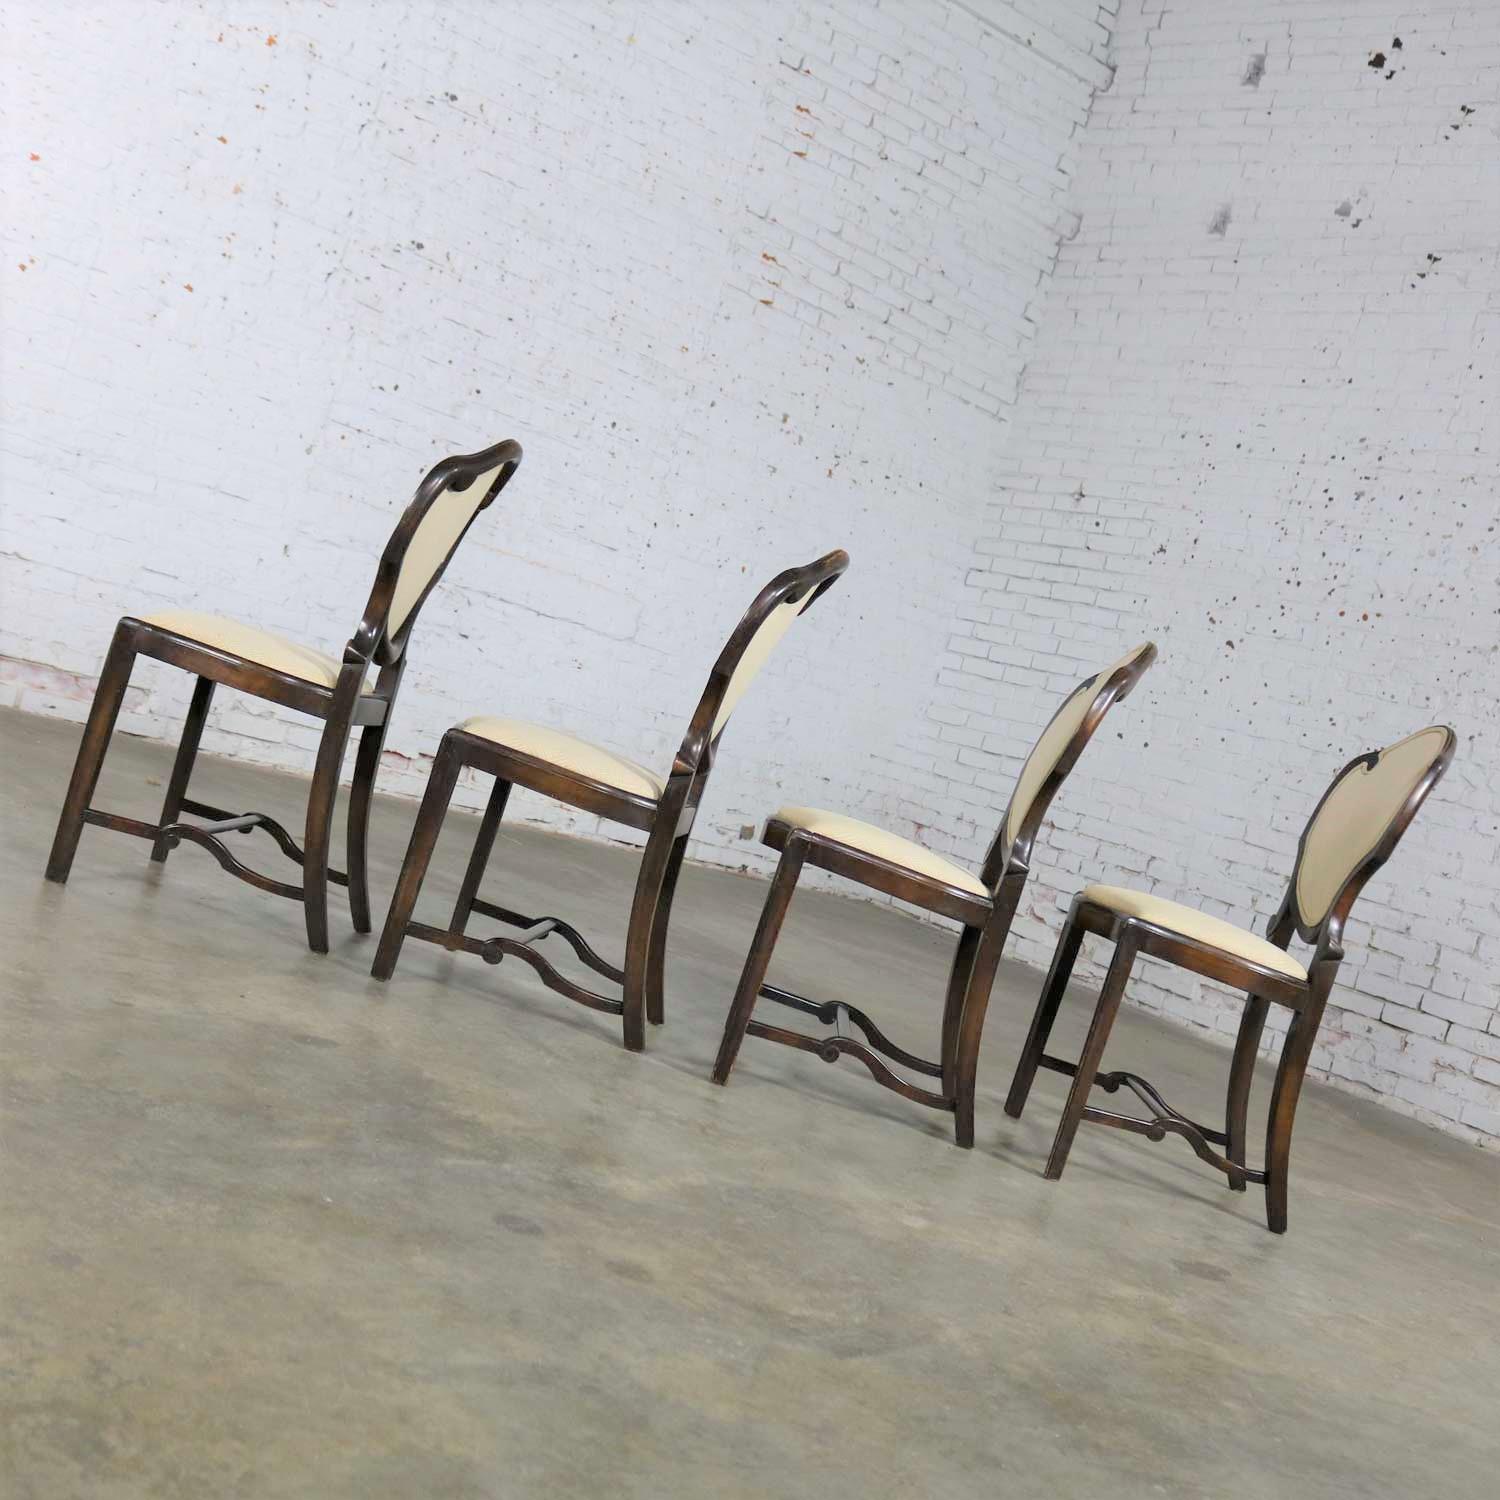 Antique Art Nouveau or Art Deco Shield Back Dining Chairs Set of Four In Good Condition For Sale In Topeka, KS